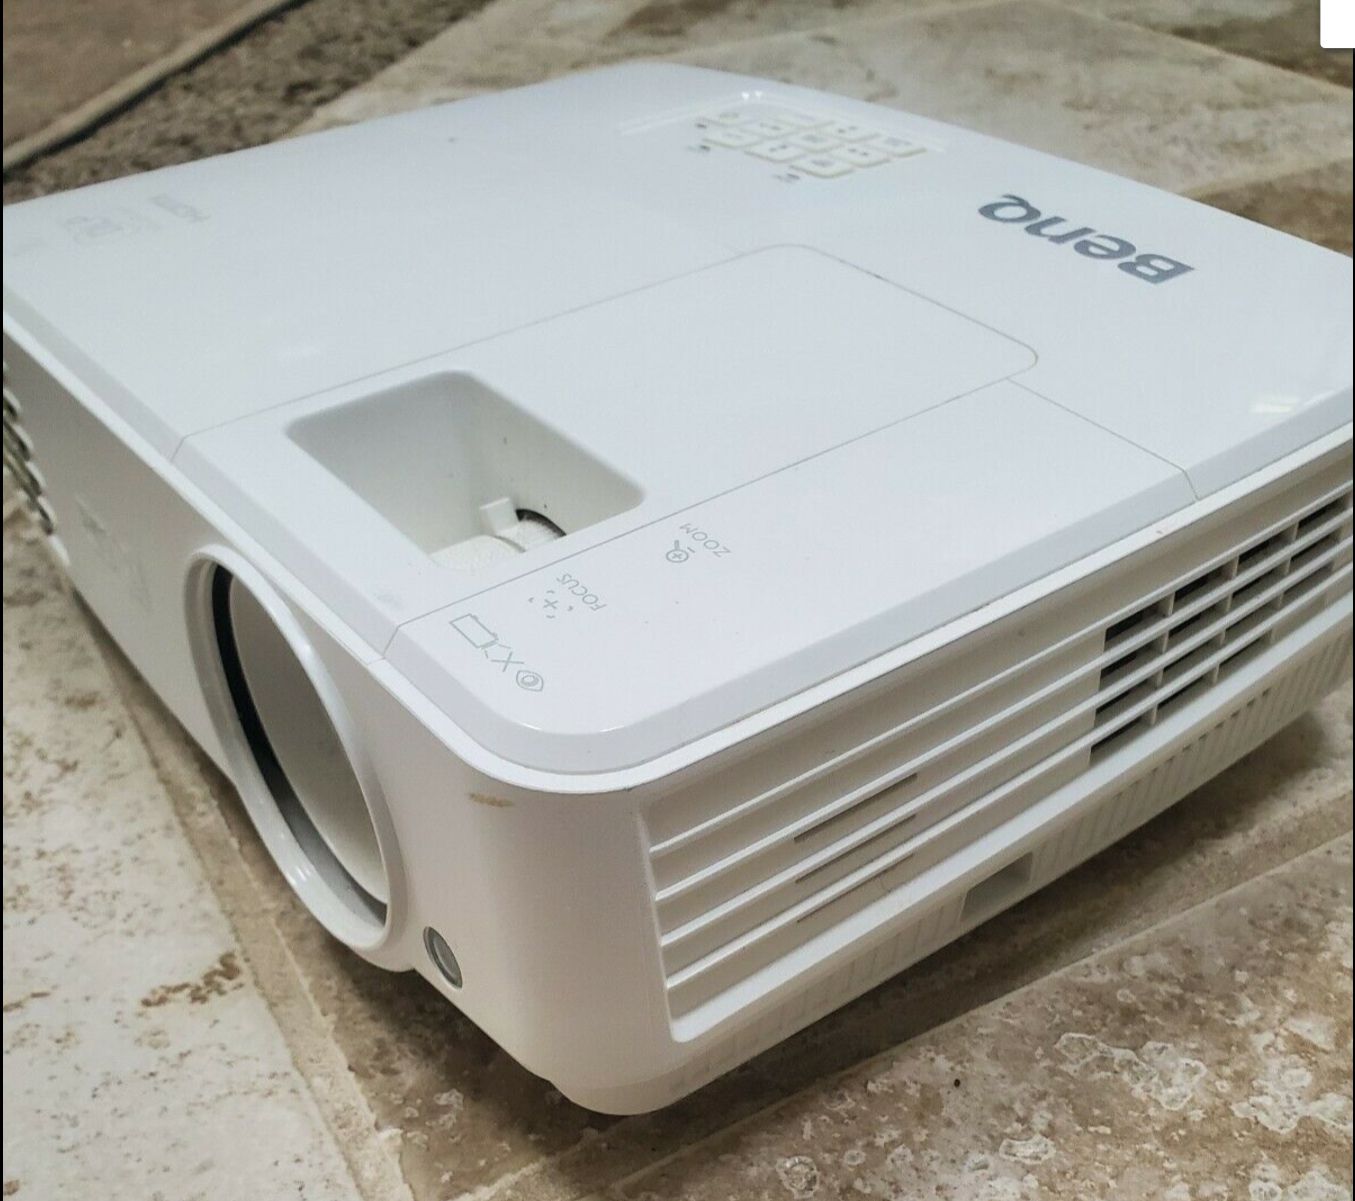 Benq Ms524 Projector With New Bulb Garage Sale The Klipsch Audio Community